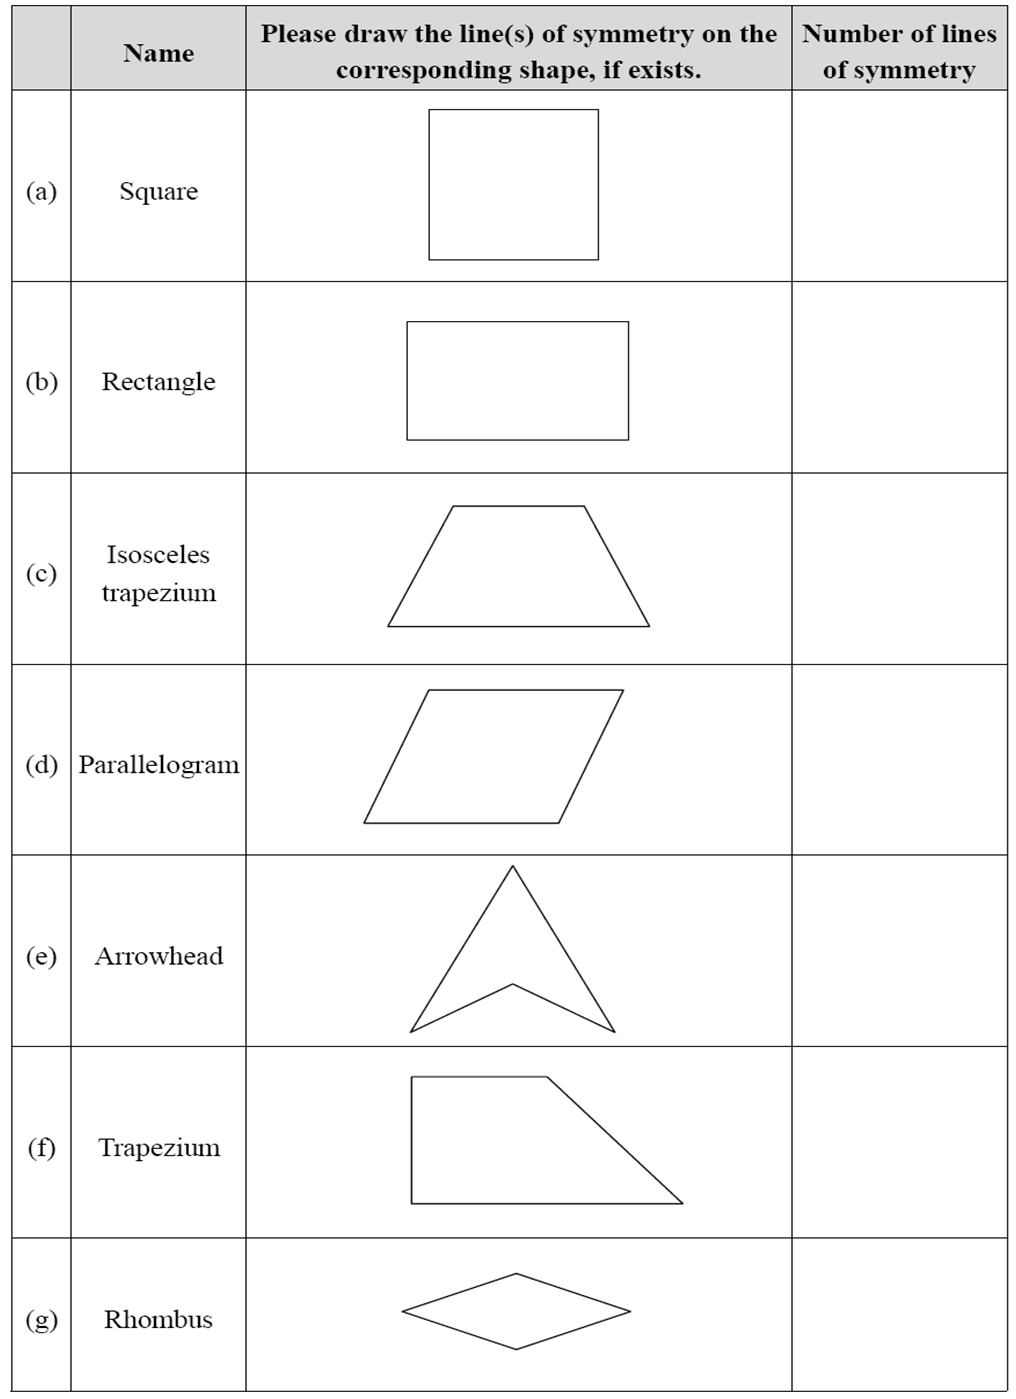 angles-in-quadrilaterals-worksheets-math-monks-area-of-quadrilateral